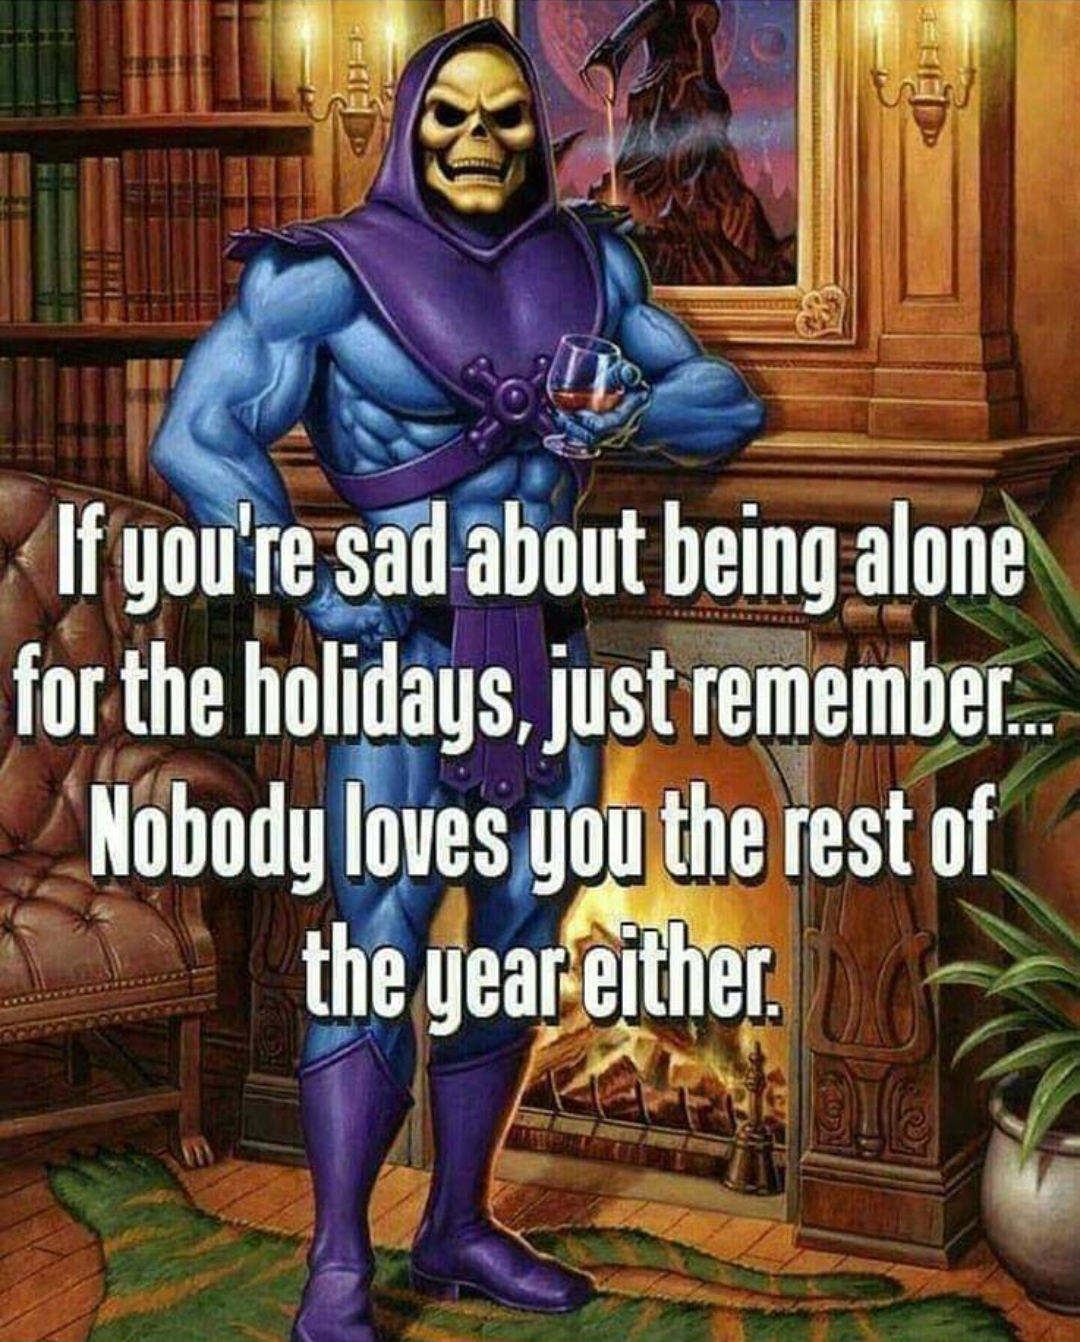 skeletor memes - If you're sad about being alone for the holidays, just remember... Nobody loves you the rest of the year either.